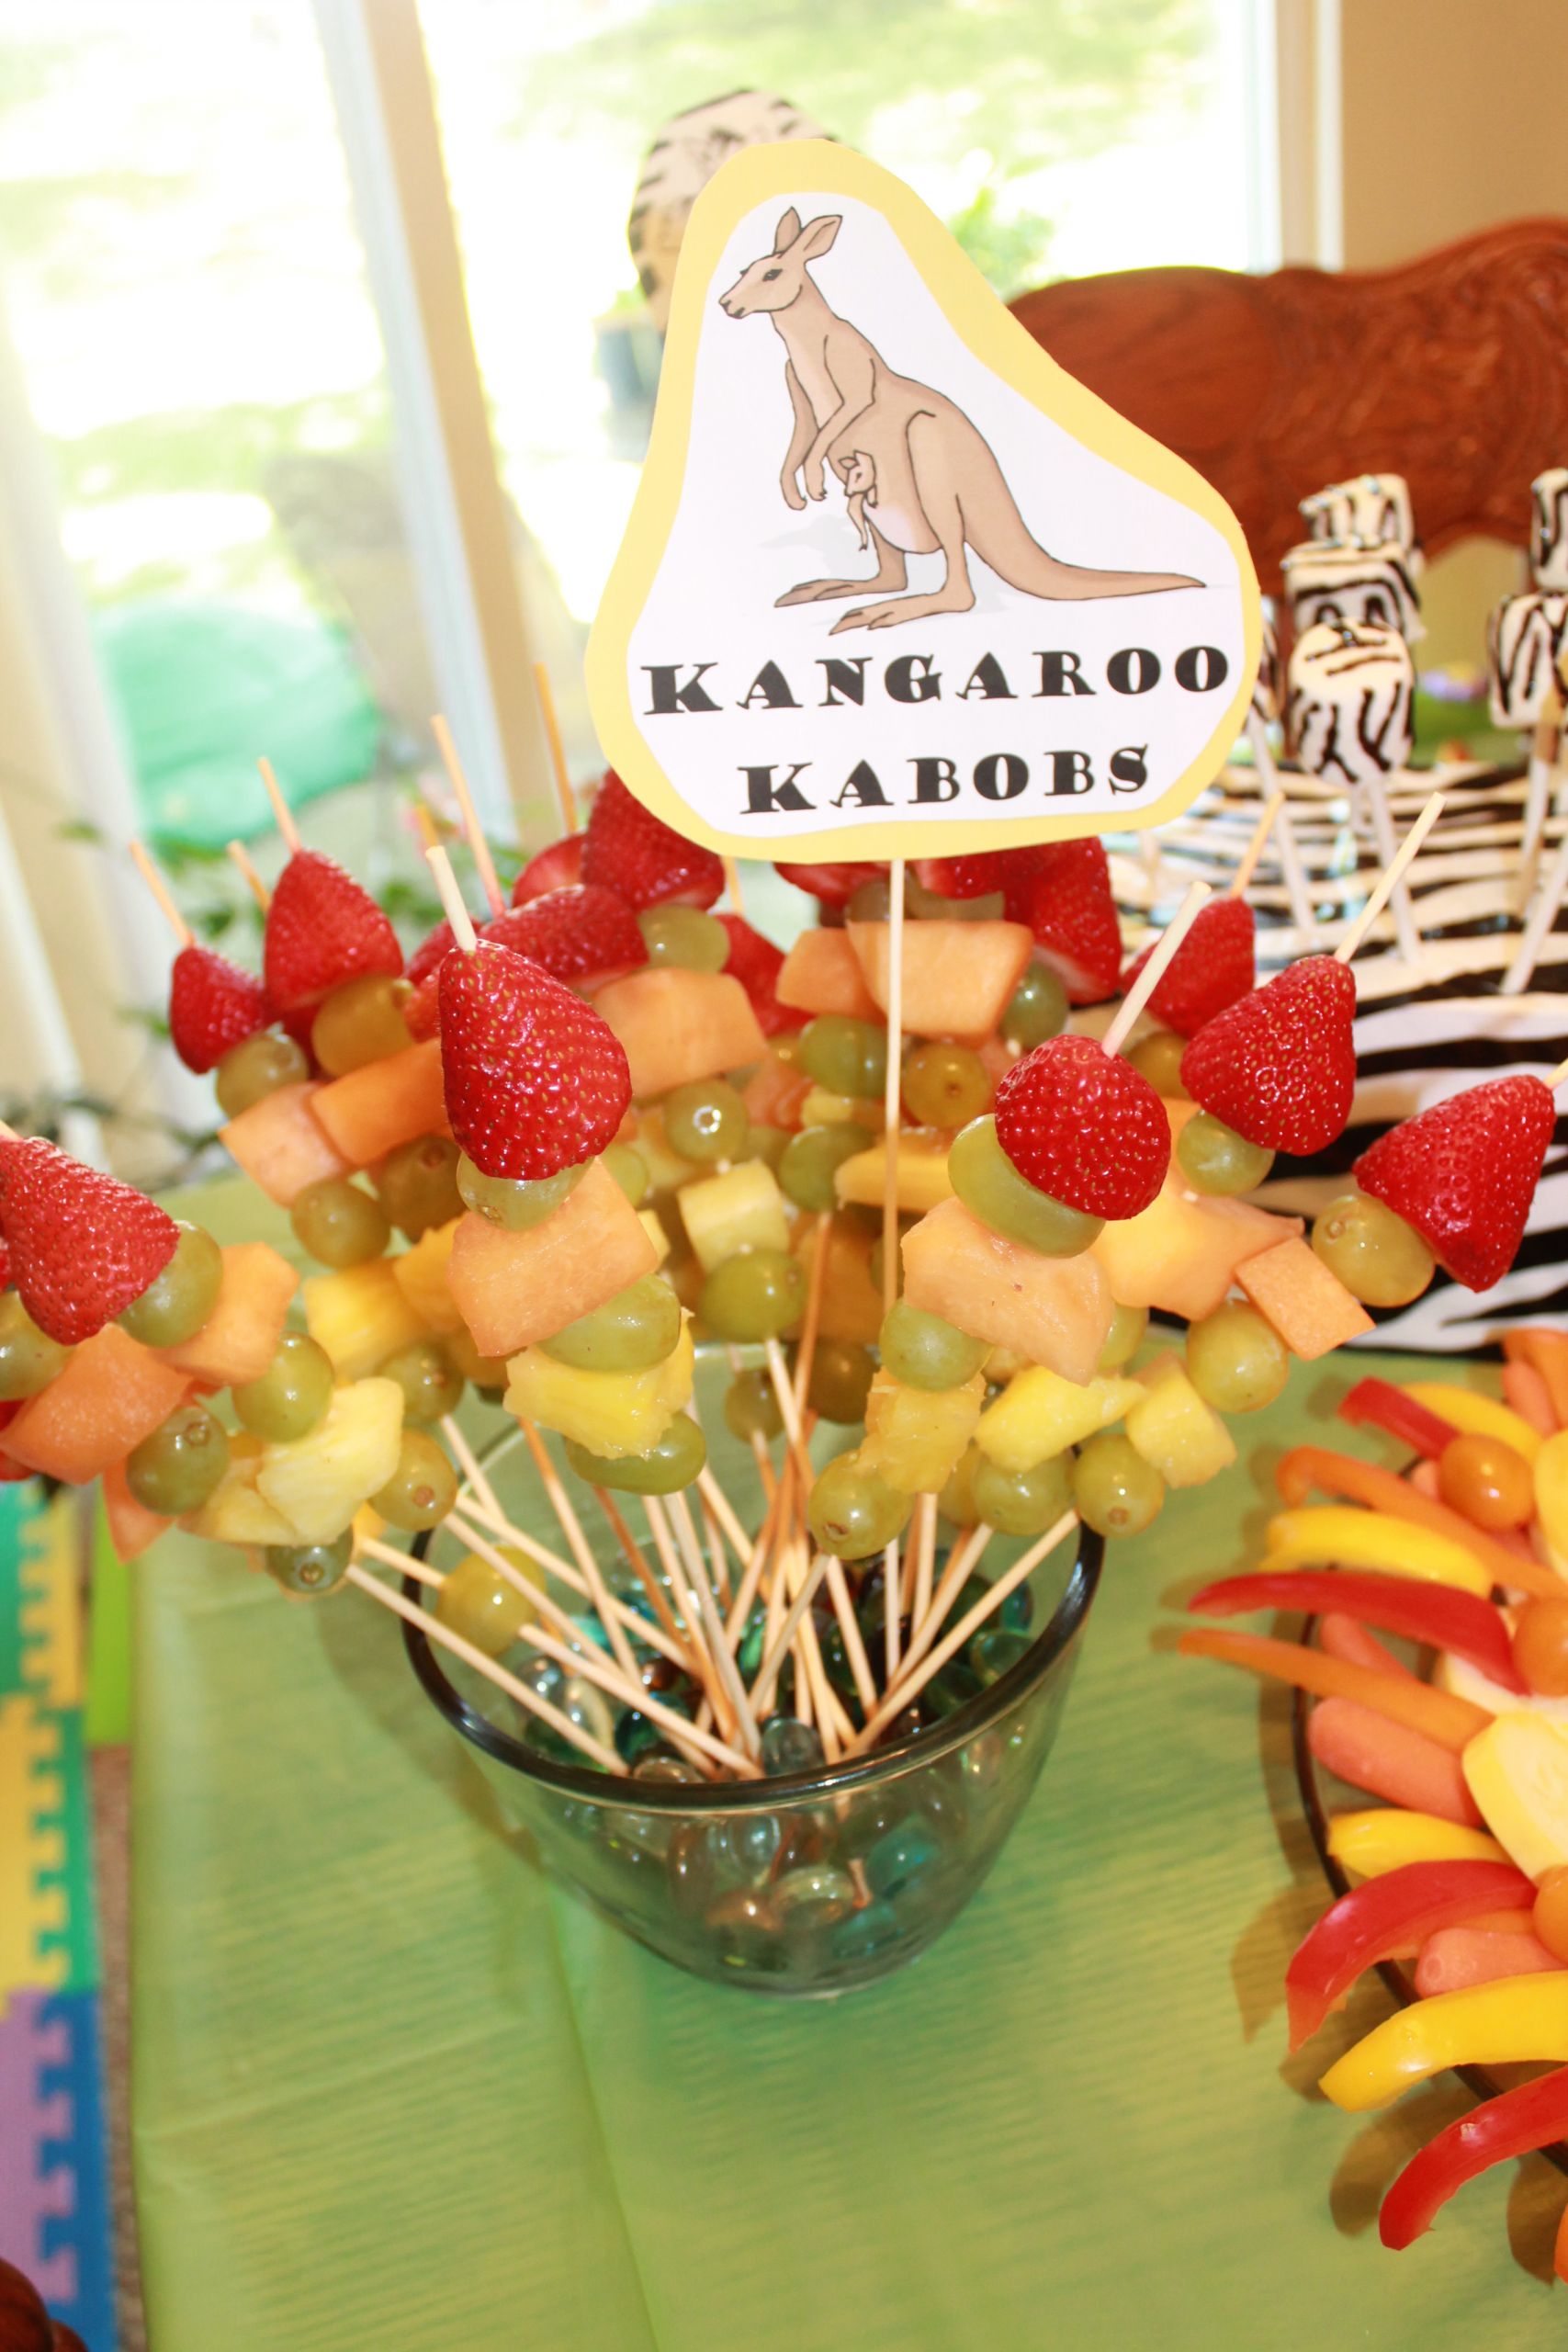 Jungle Party Food Ideas
 Kangaro kabobs and other fabulous food ideas for a zoo